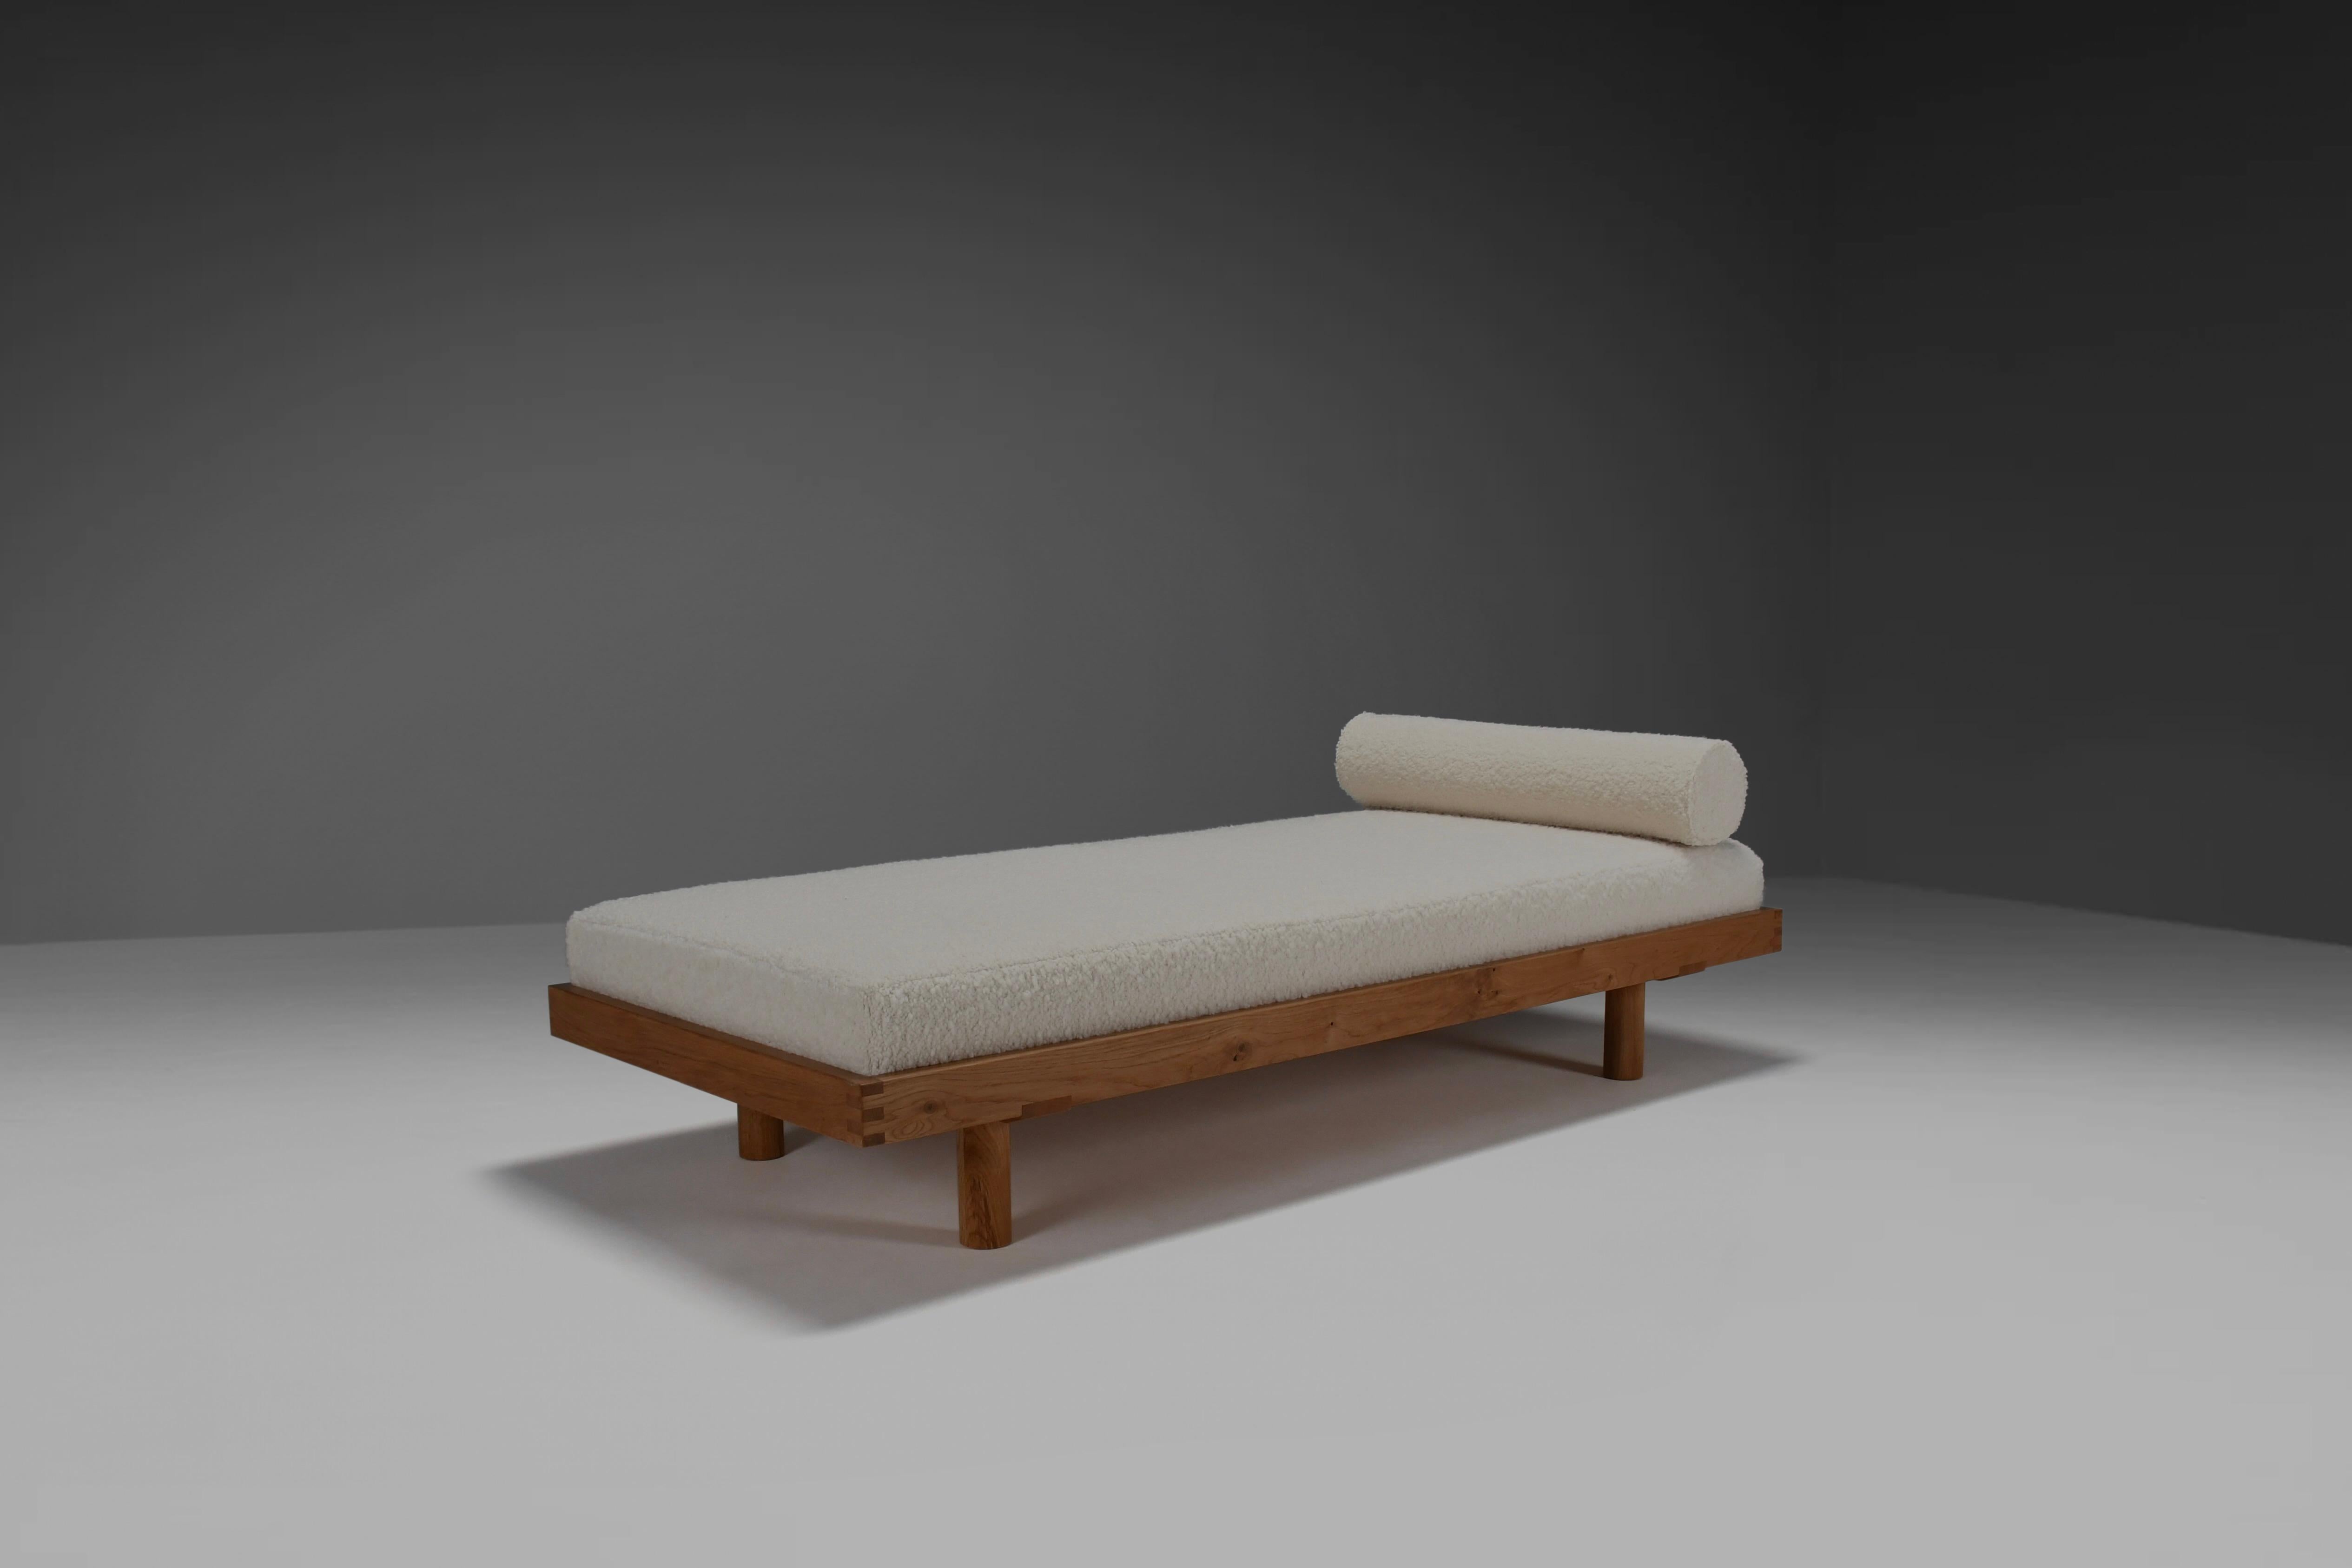 Daybed L01 by Pierre Chapo in very good condition.

The daybed is characterized by Sober design and simple lines. Made from oak wood, with the characteristic box joints on the corners. This oak wood version is pretty rare, mostly you will find the